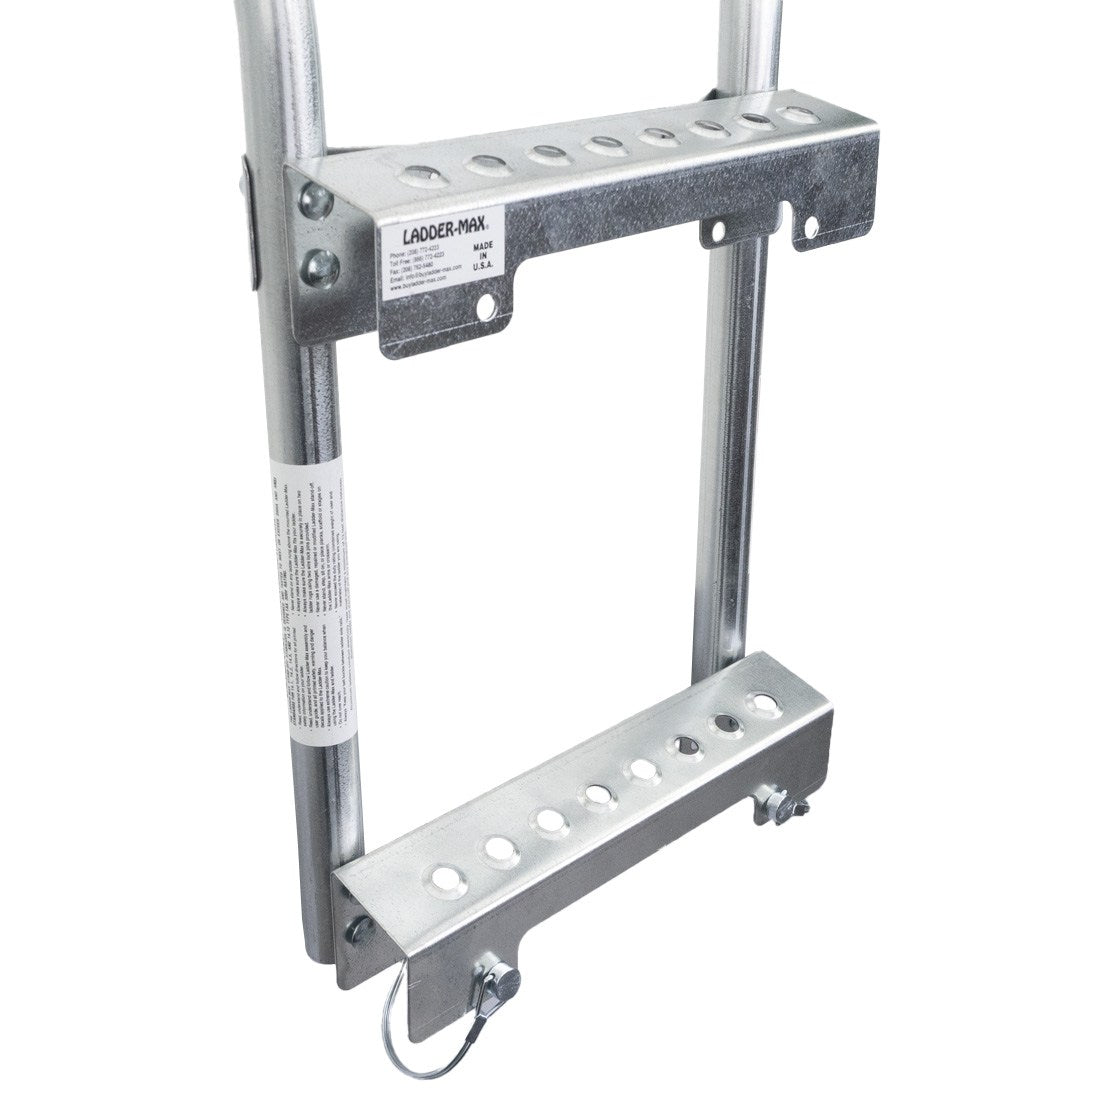 Ladder-Max Multi-Pro Stand-Off Stabilizer Bottom View